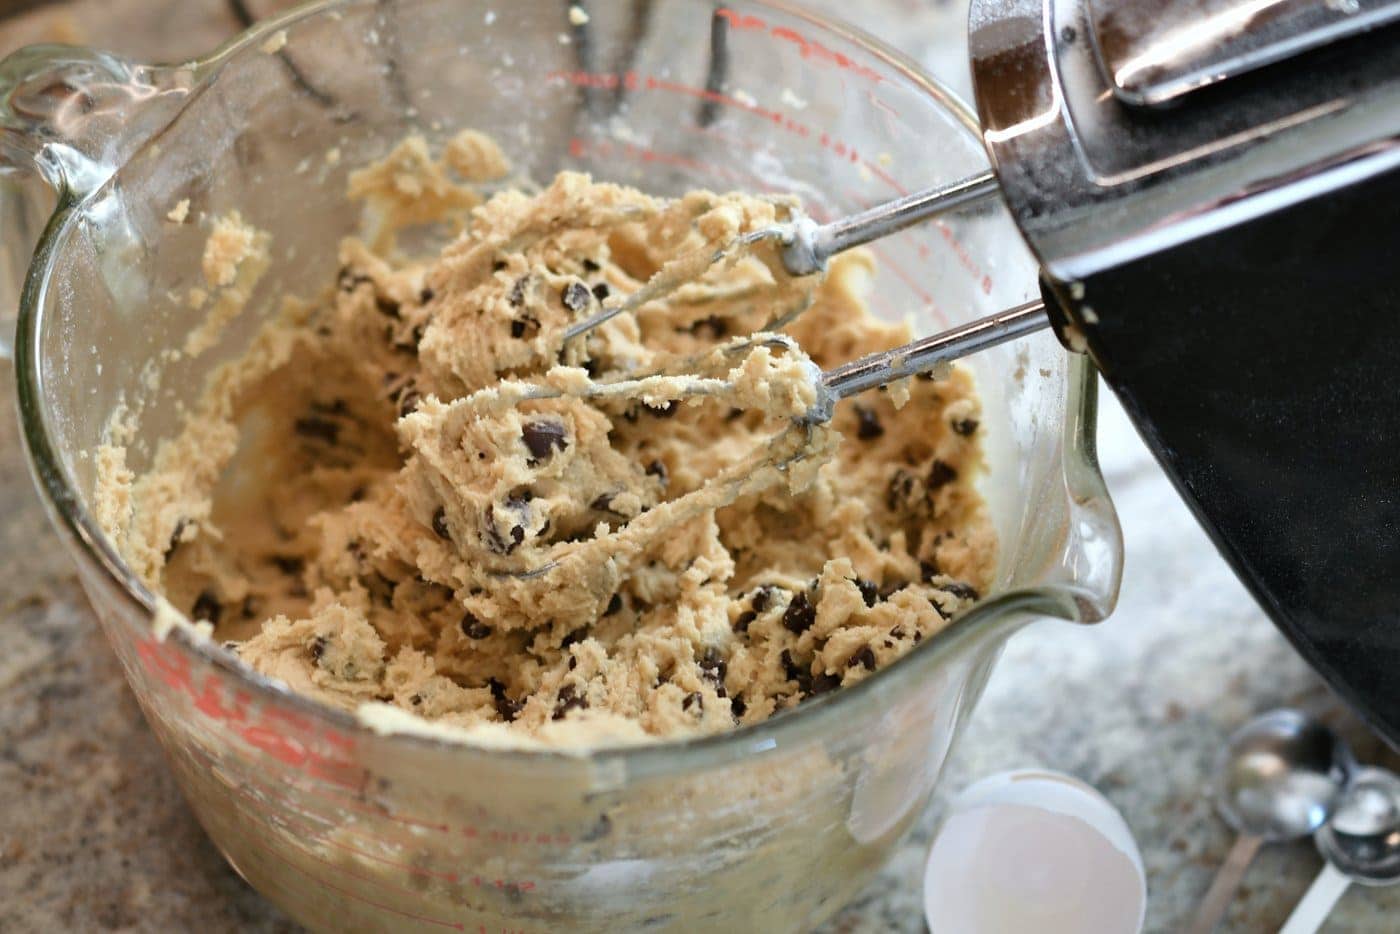 Making chocolate chip cookie dough